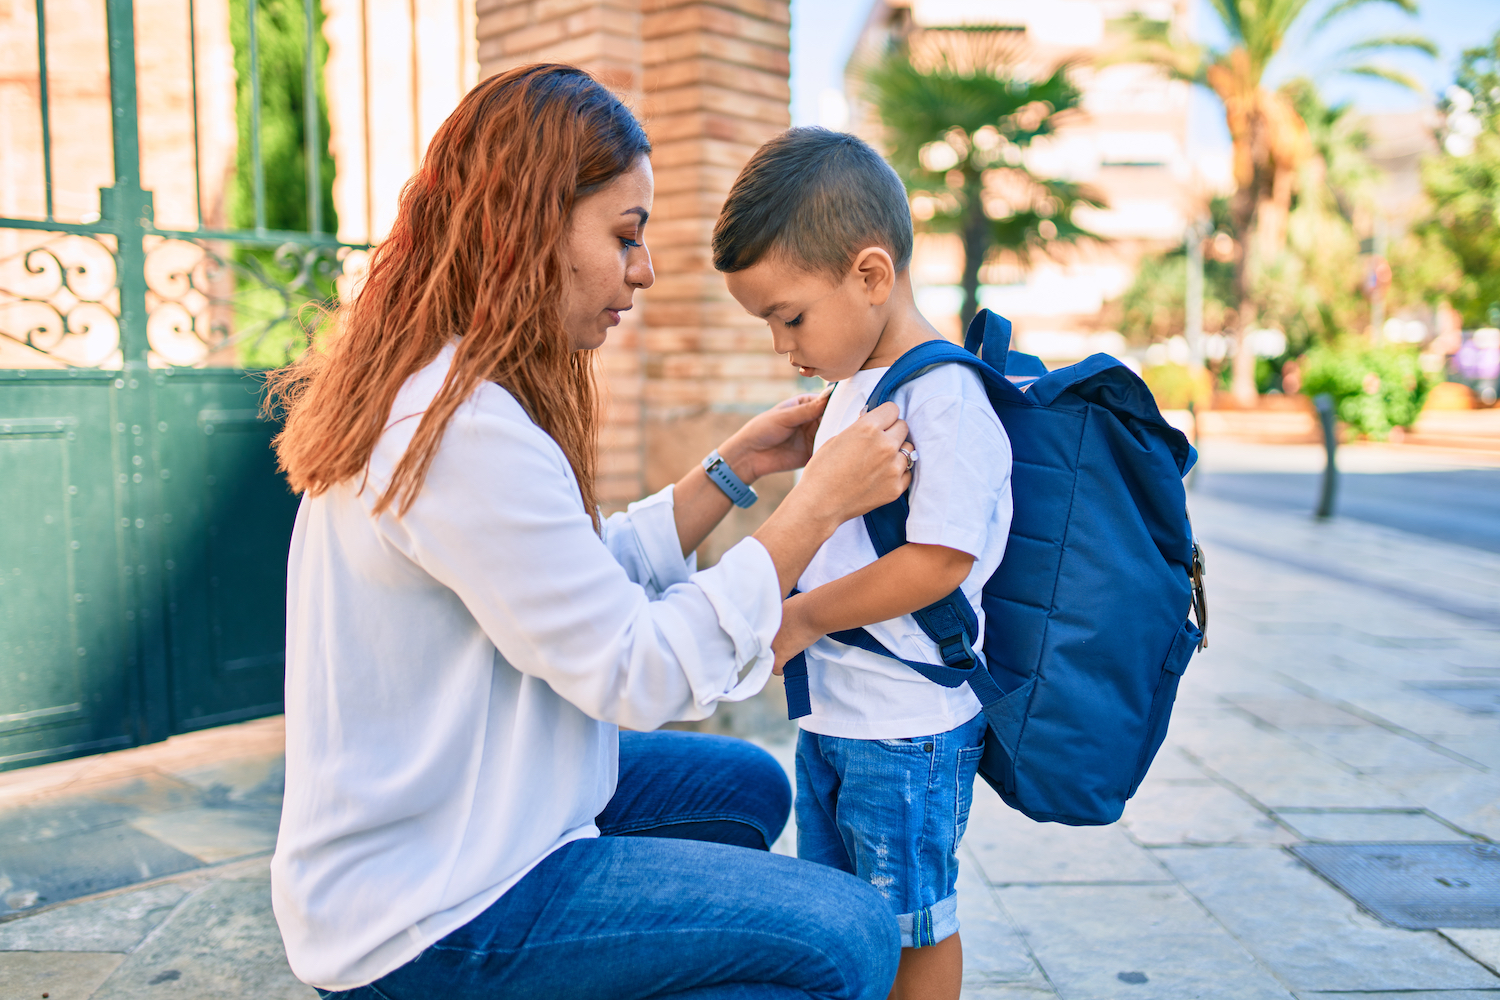 Latin mother putting up backpack her student son at the city.